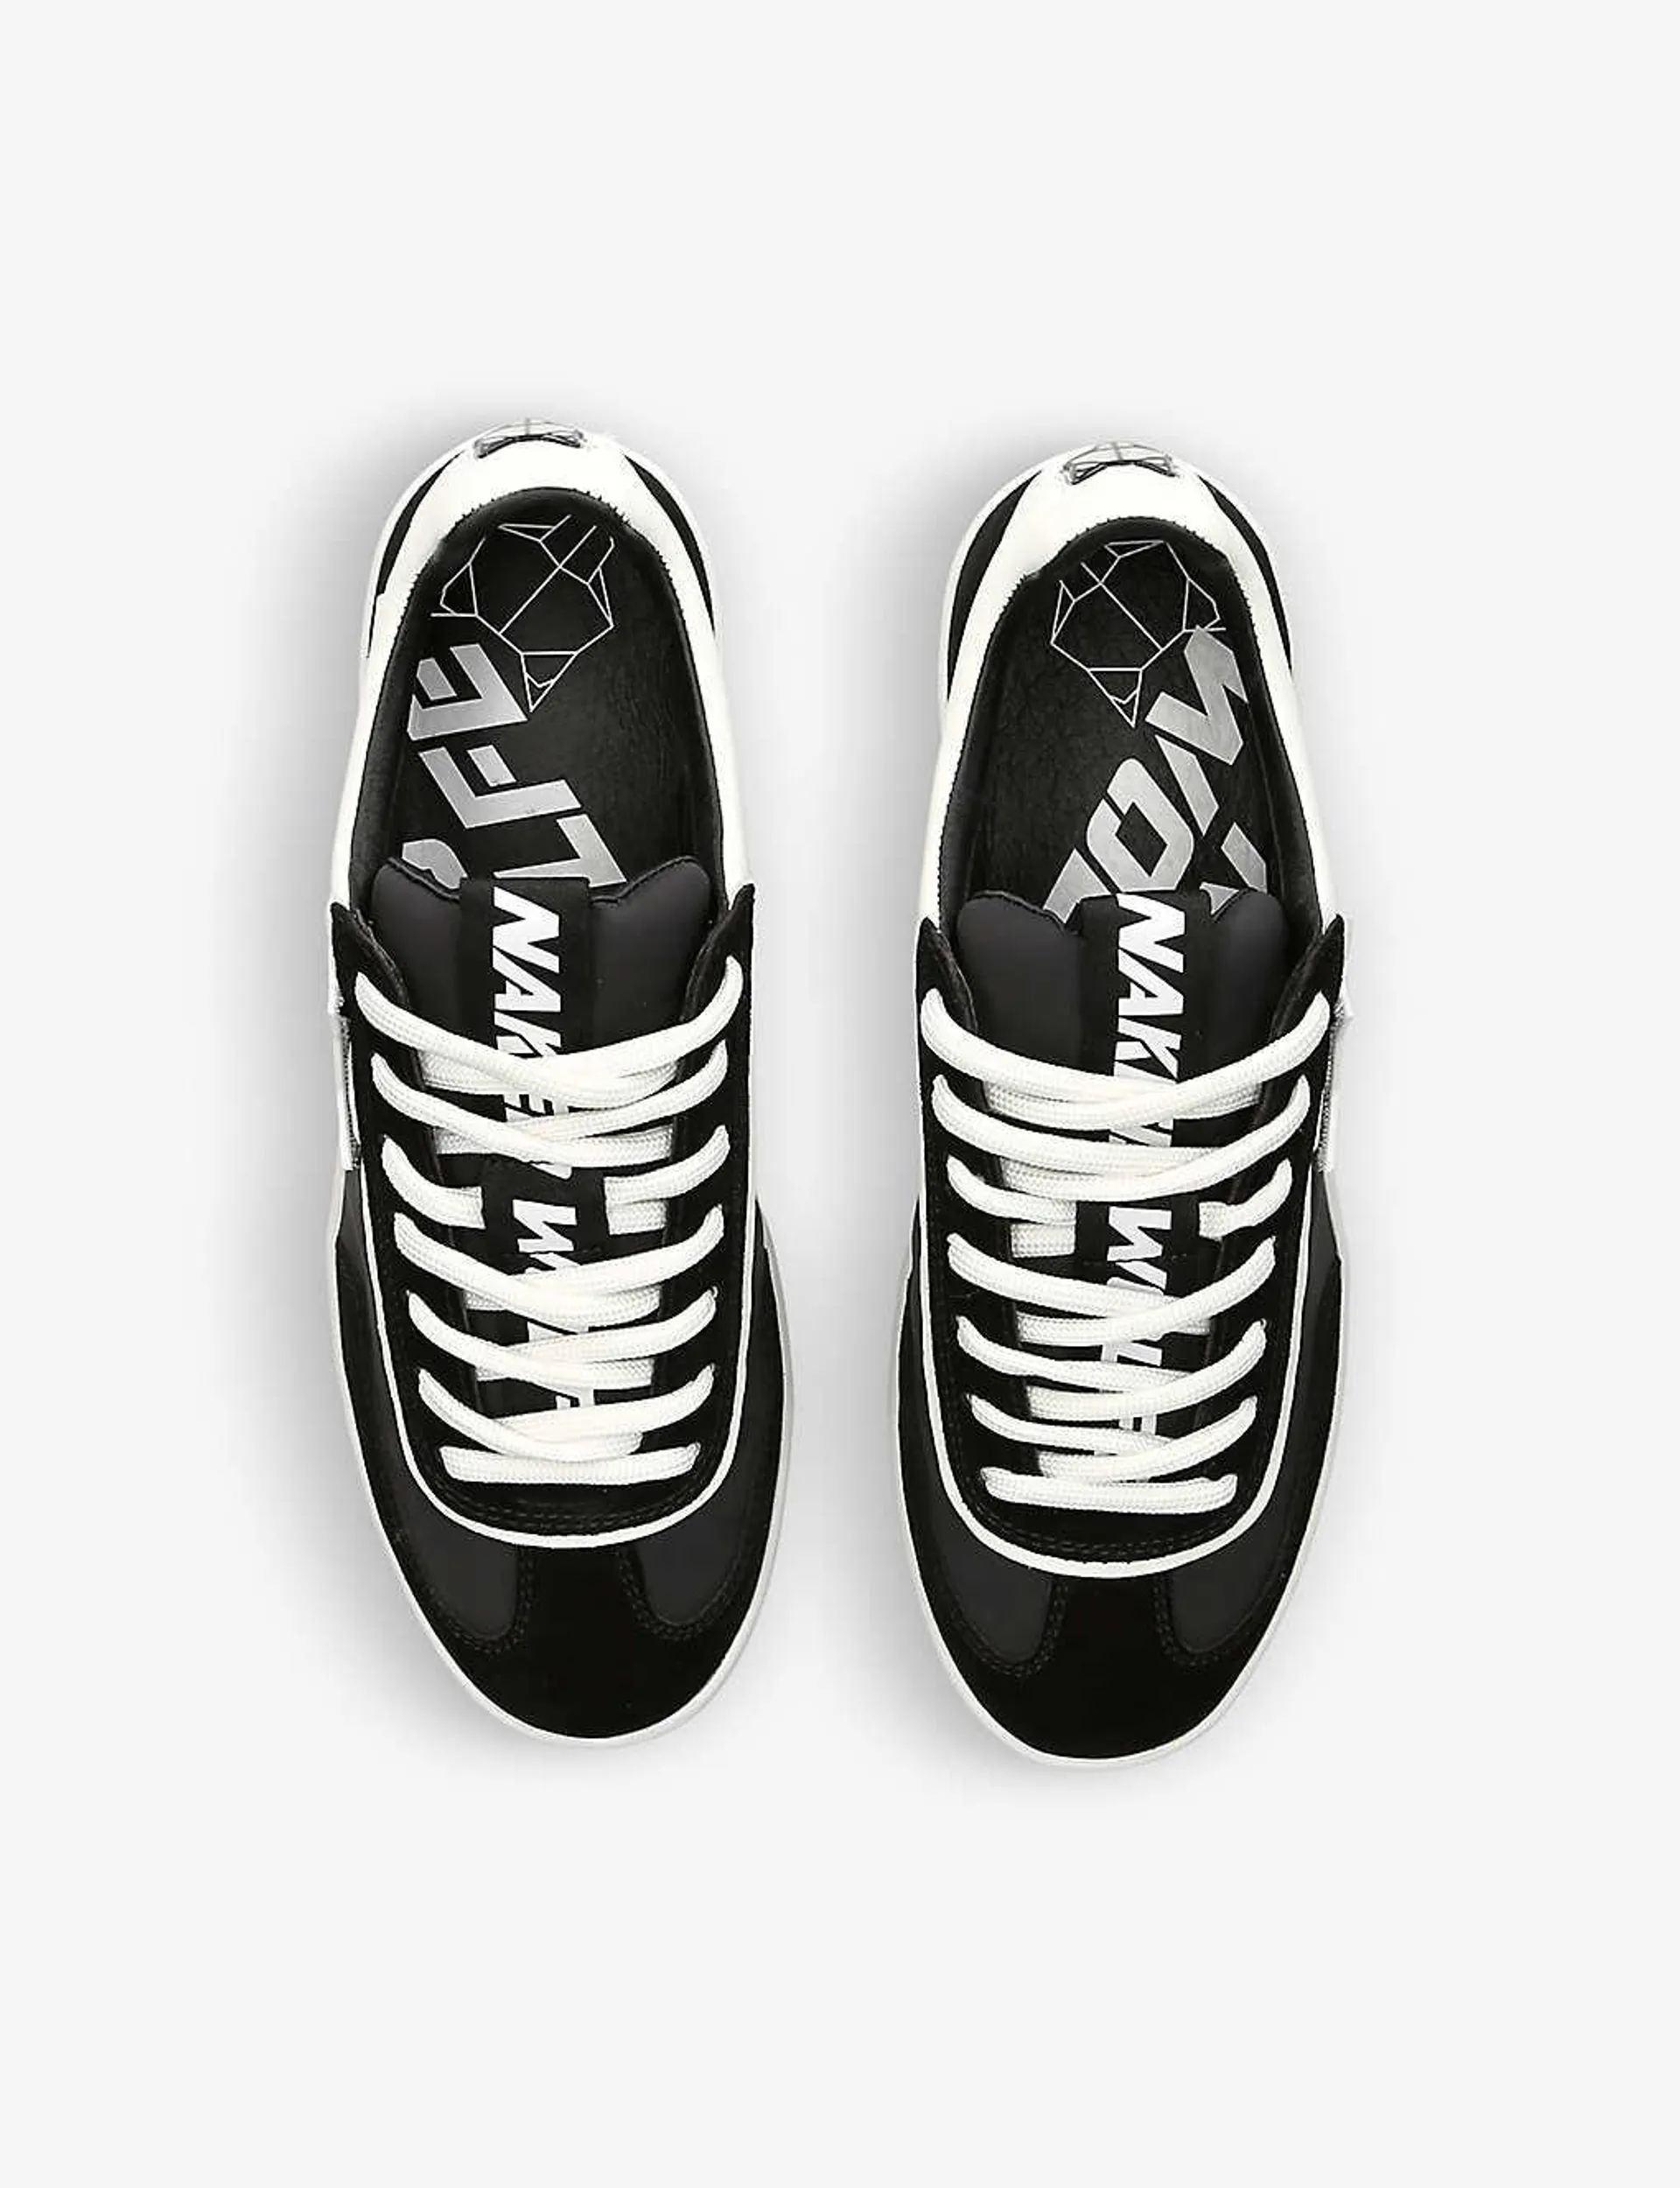 Palm hook-and-loop spirit wolfehead leather trainers